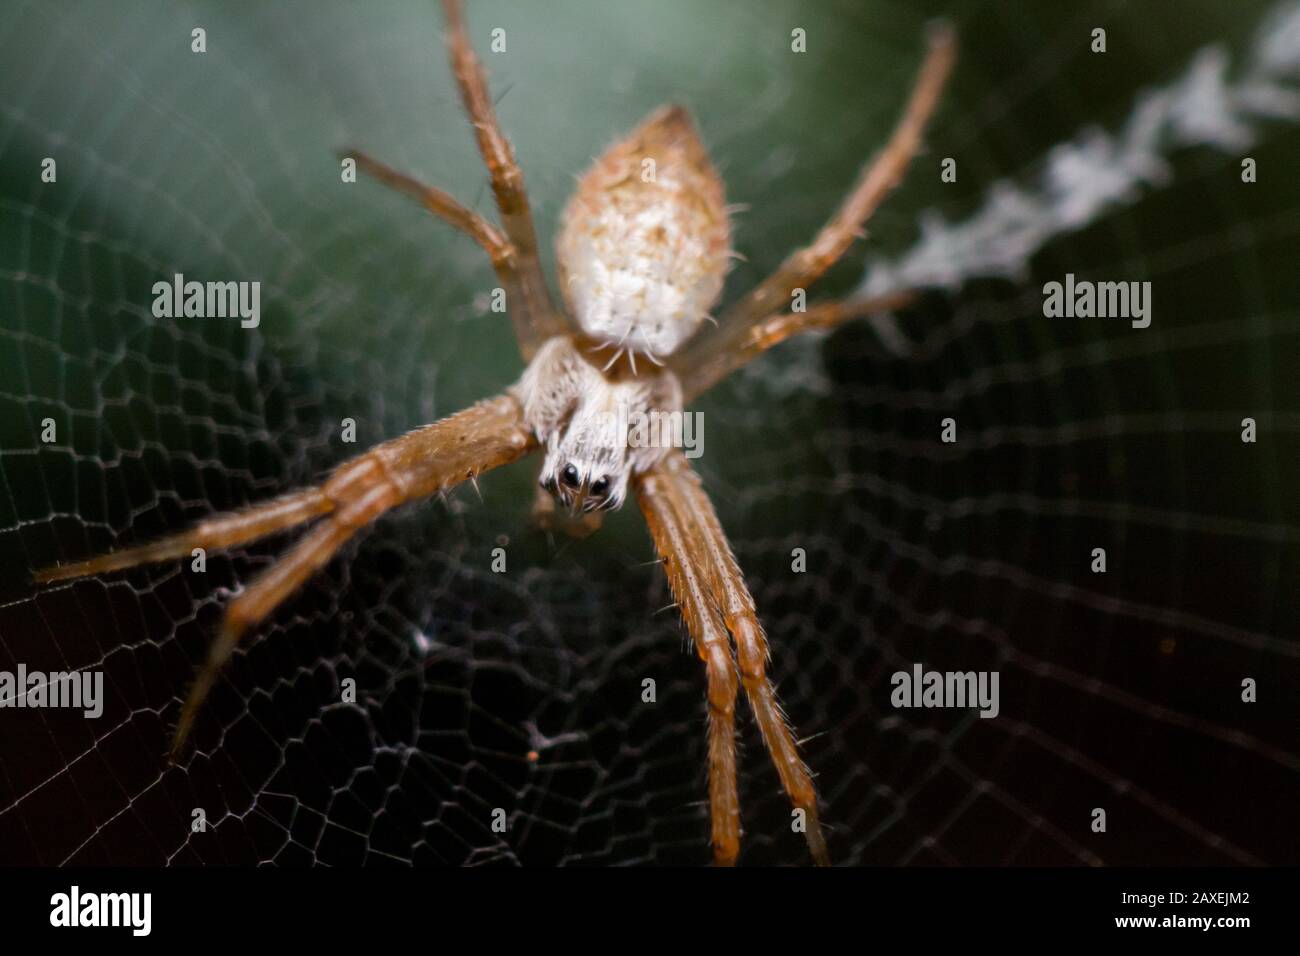 Details of a silver argiope or writting spider (Argiope) on it's web Stock Photo